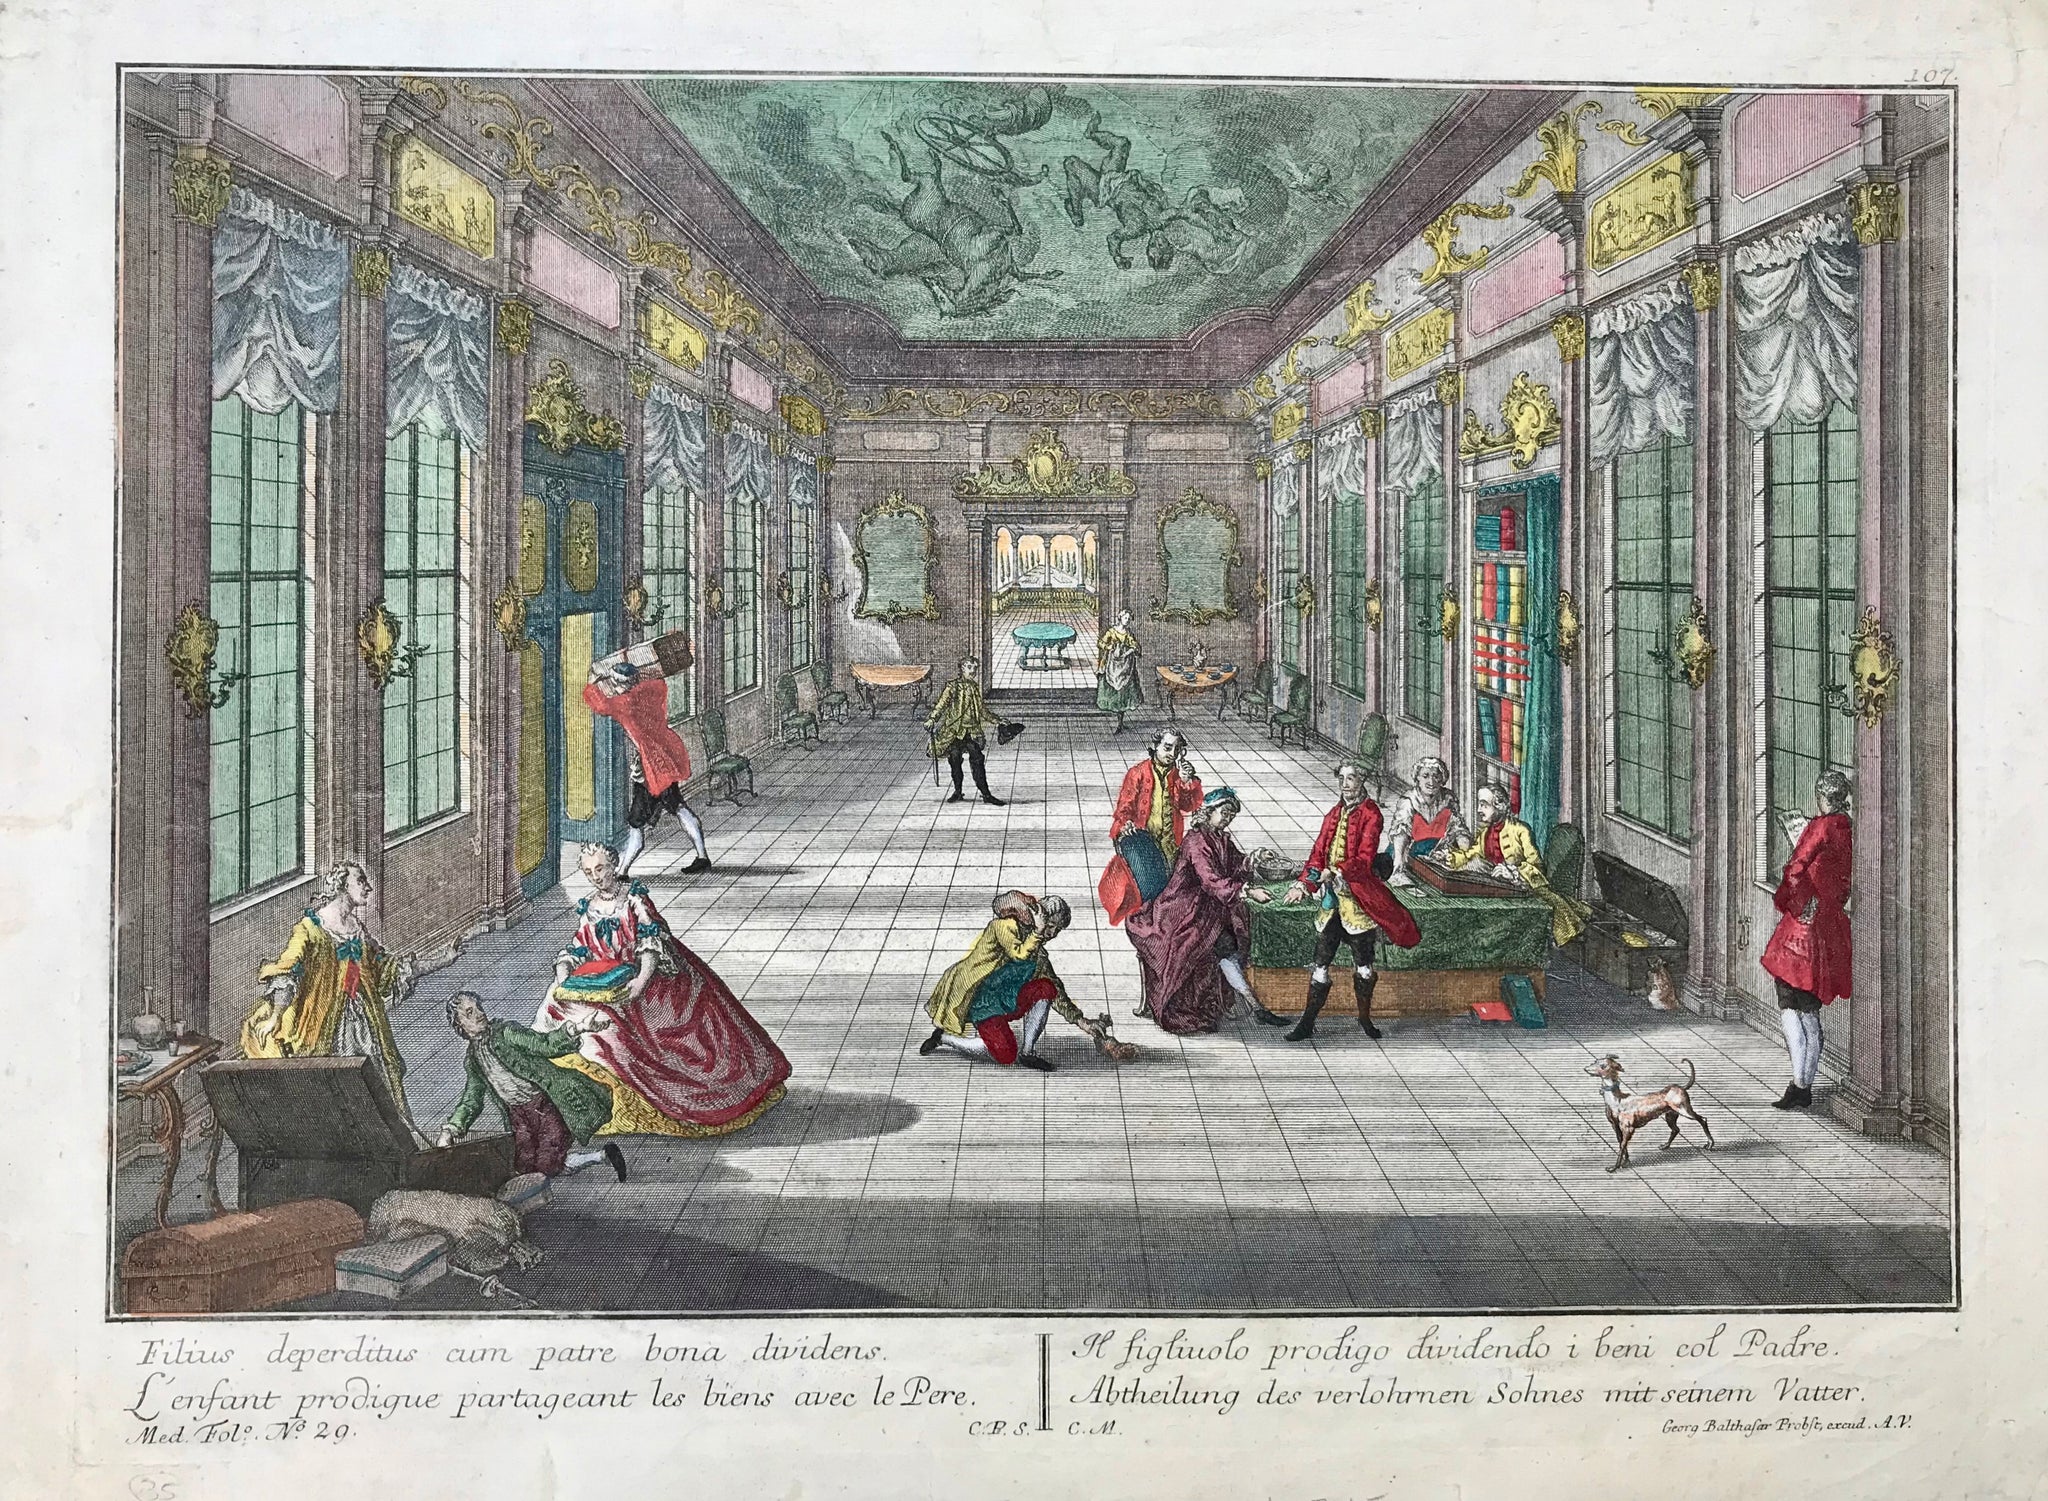 From the episode of 6 engravings "The prodigal son". "Il figliolo prodigo dividendo i beni col Padre". The son receives his patrimony.  Vue d'optique. Copper etching. Very good original hand coloring. Published by Georg Balthasar Probst. Augsburg, ca. 1770.  General age toning. Margins a bit spotty and roundabout reenforced to repair insignificant tears. Title: Latin, Italian, French, German.